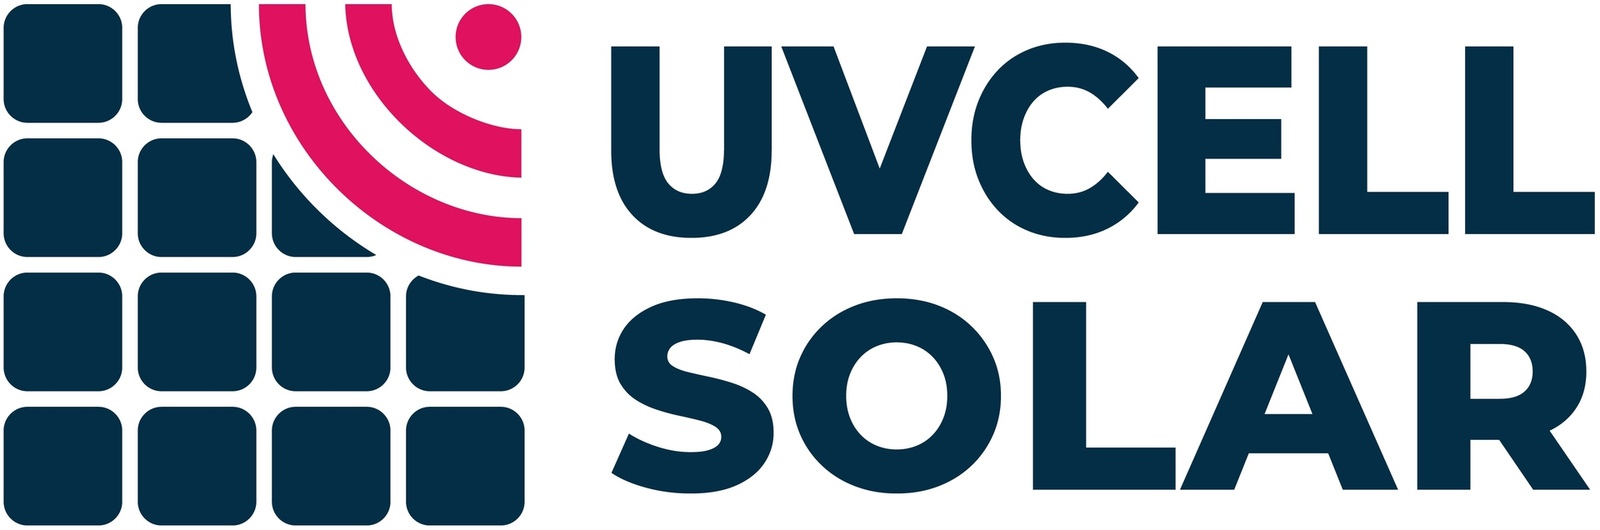 UVcell Solar acquires SolarFeeds.com to expand its digital presence and enhance solar solution offerings globally.